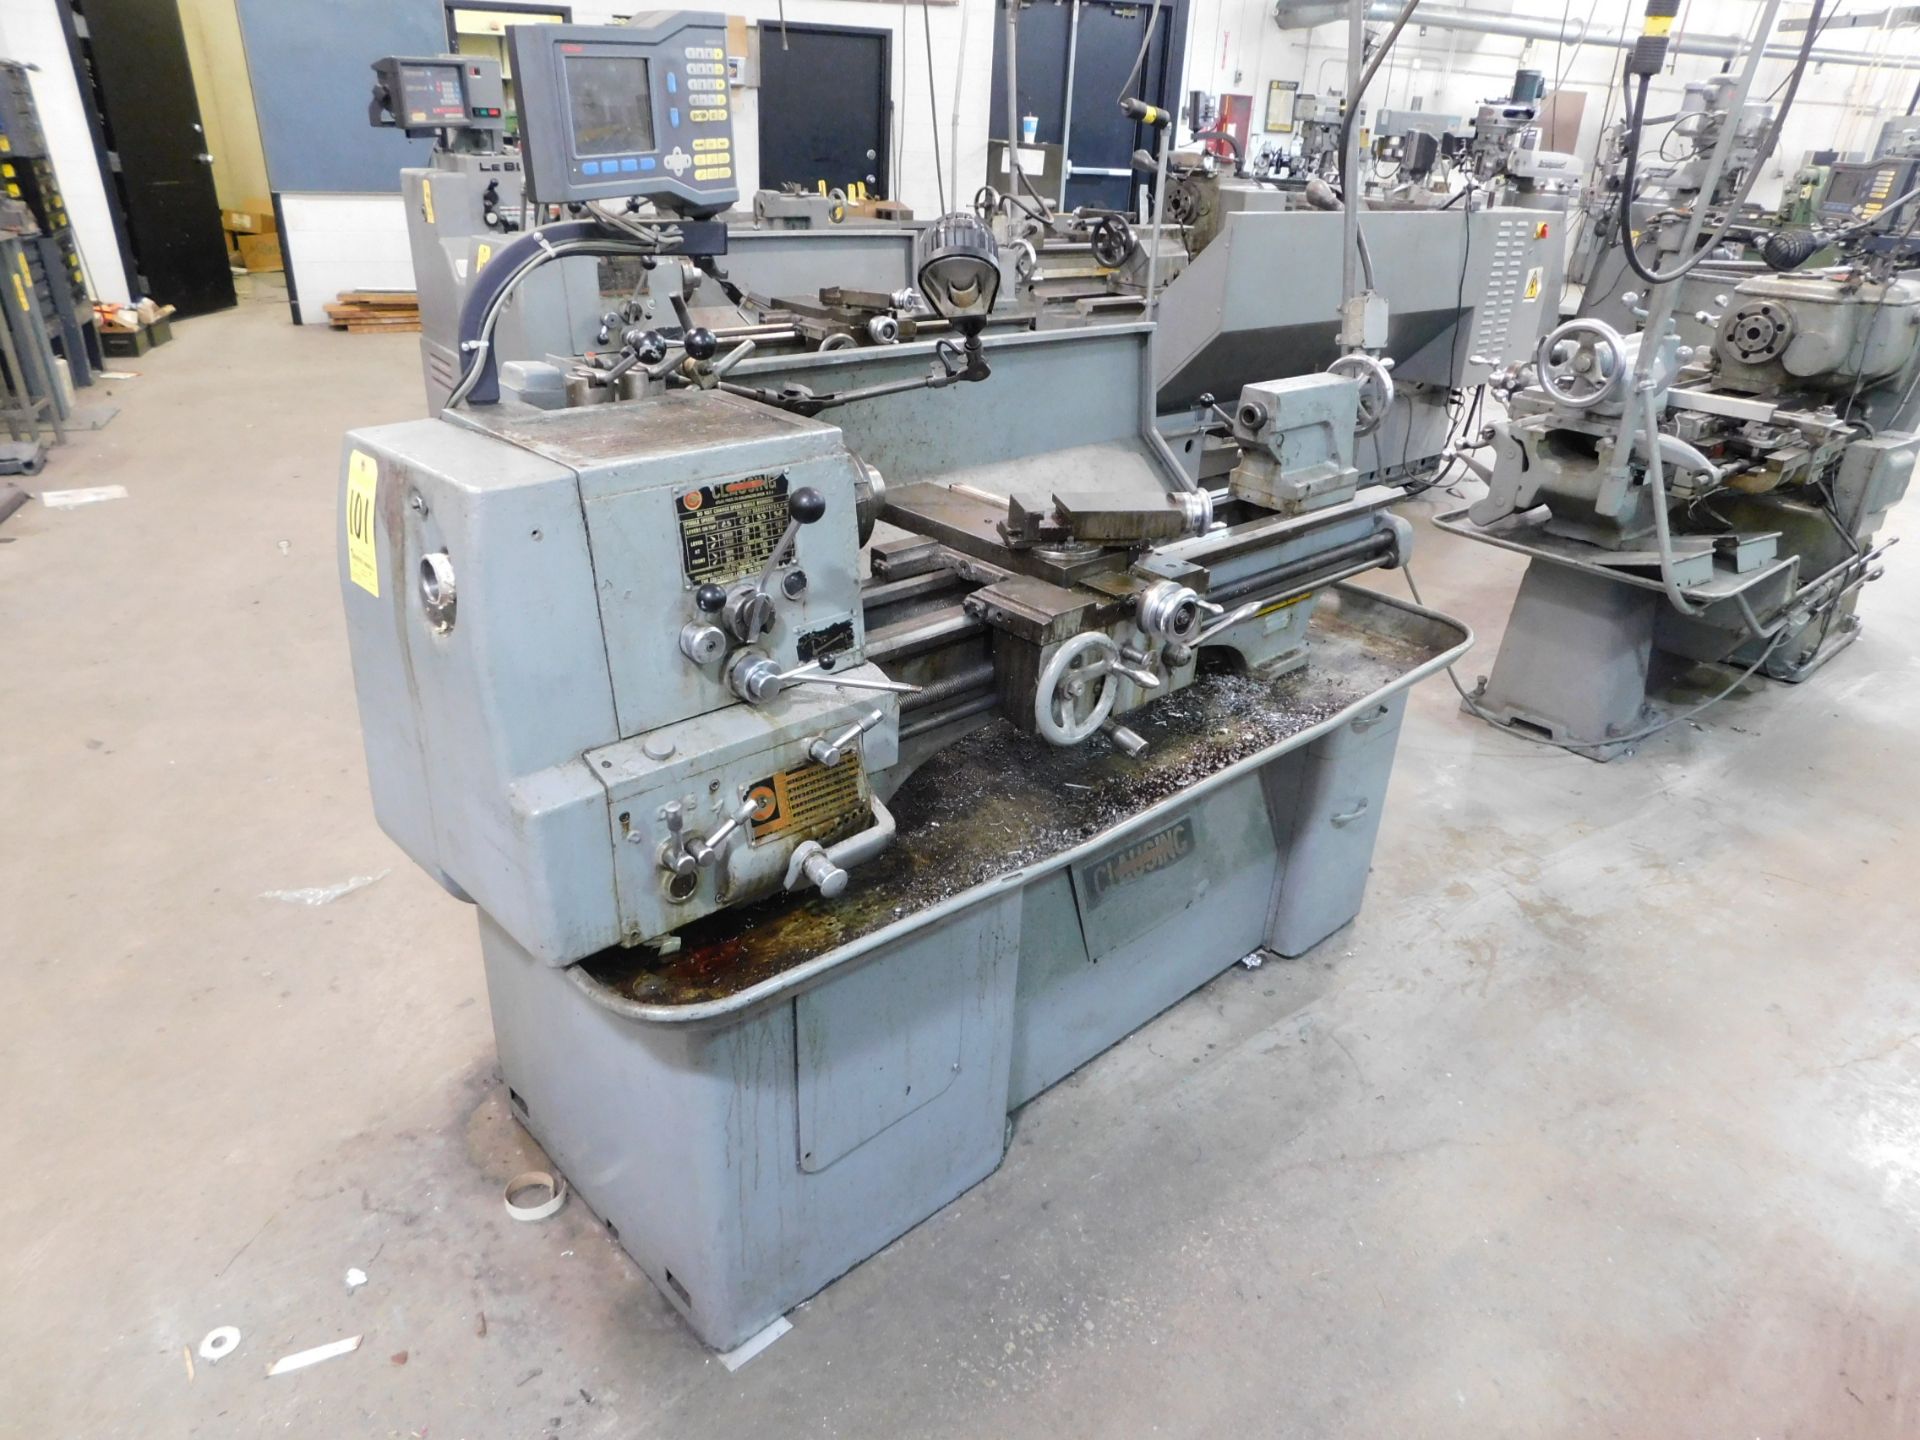 Clausing Colchester 13" x 36" Toolroom Lathe, SN F3/73188, with Anilam Wizard 411 2-Axis Digital